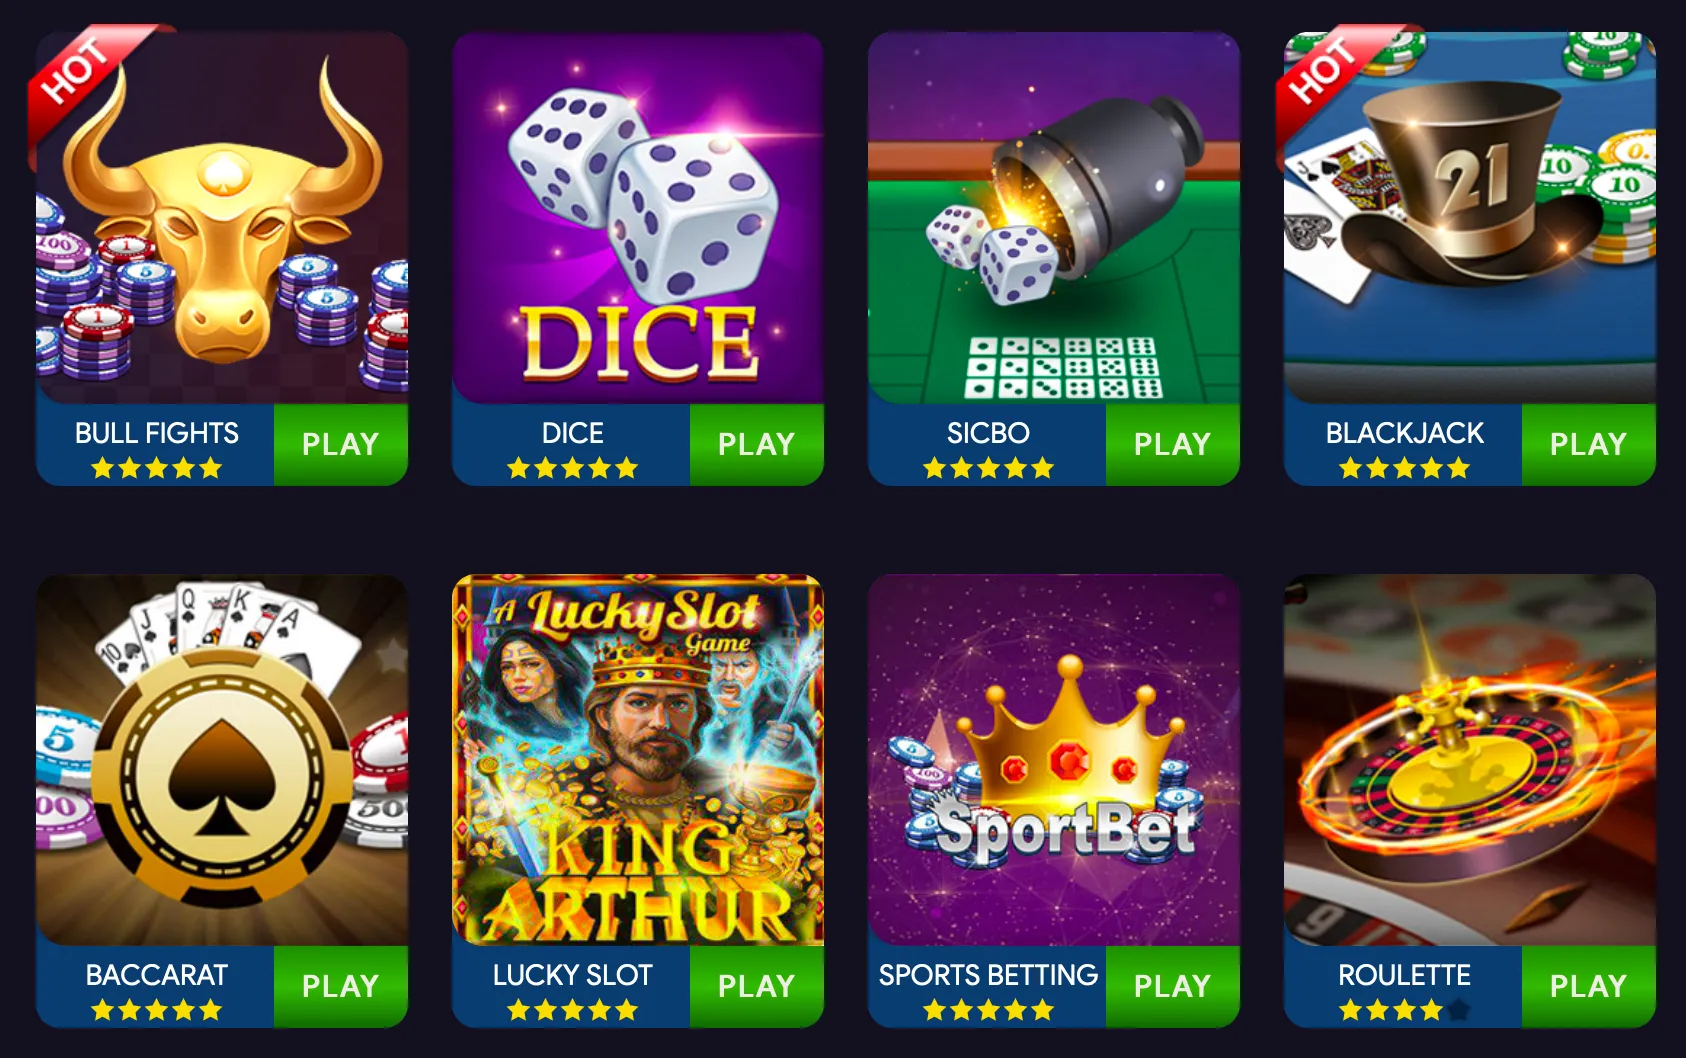 blockchain game dice offers many games